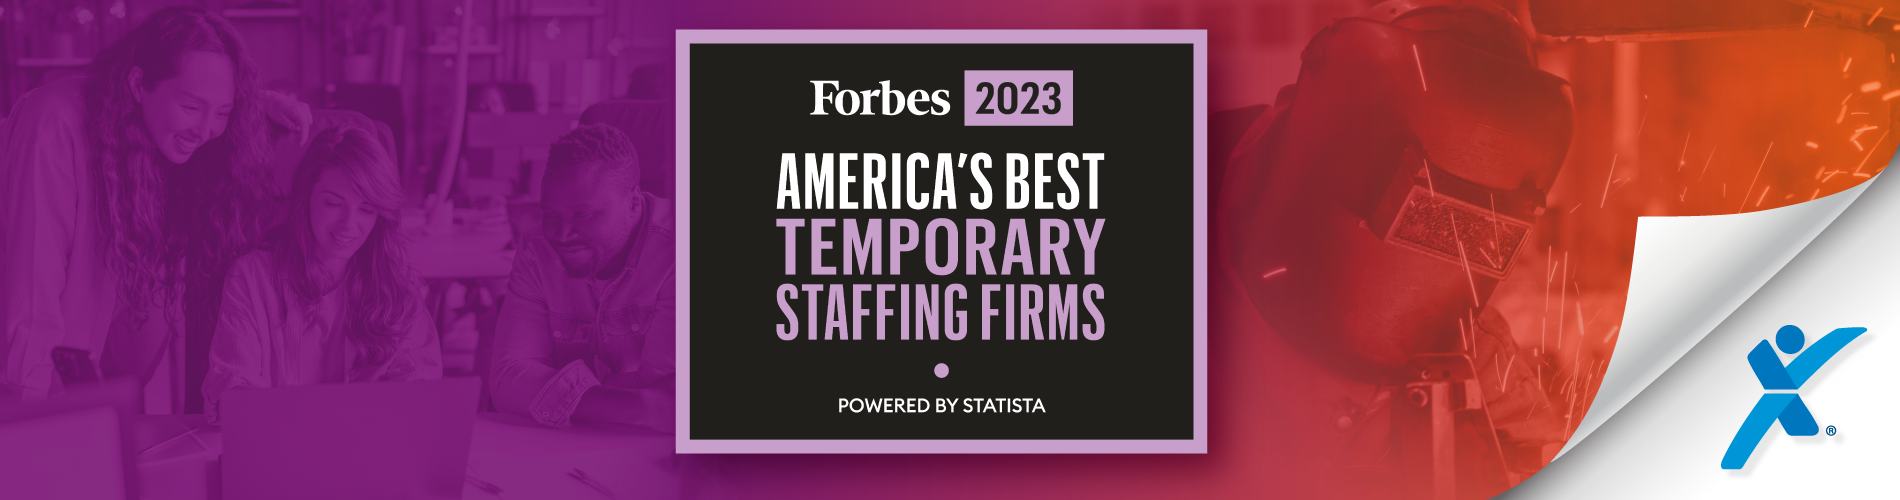 Forbes-Best-Temp-Staffing-EEP-2023